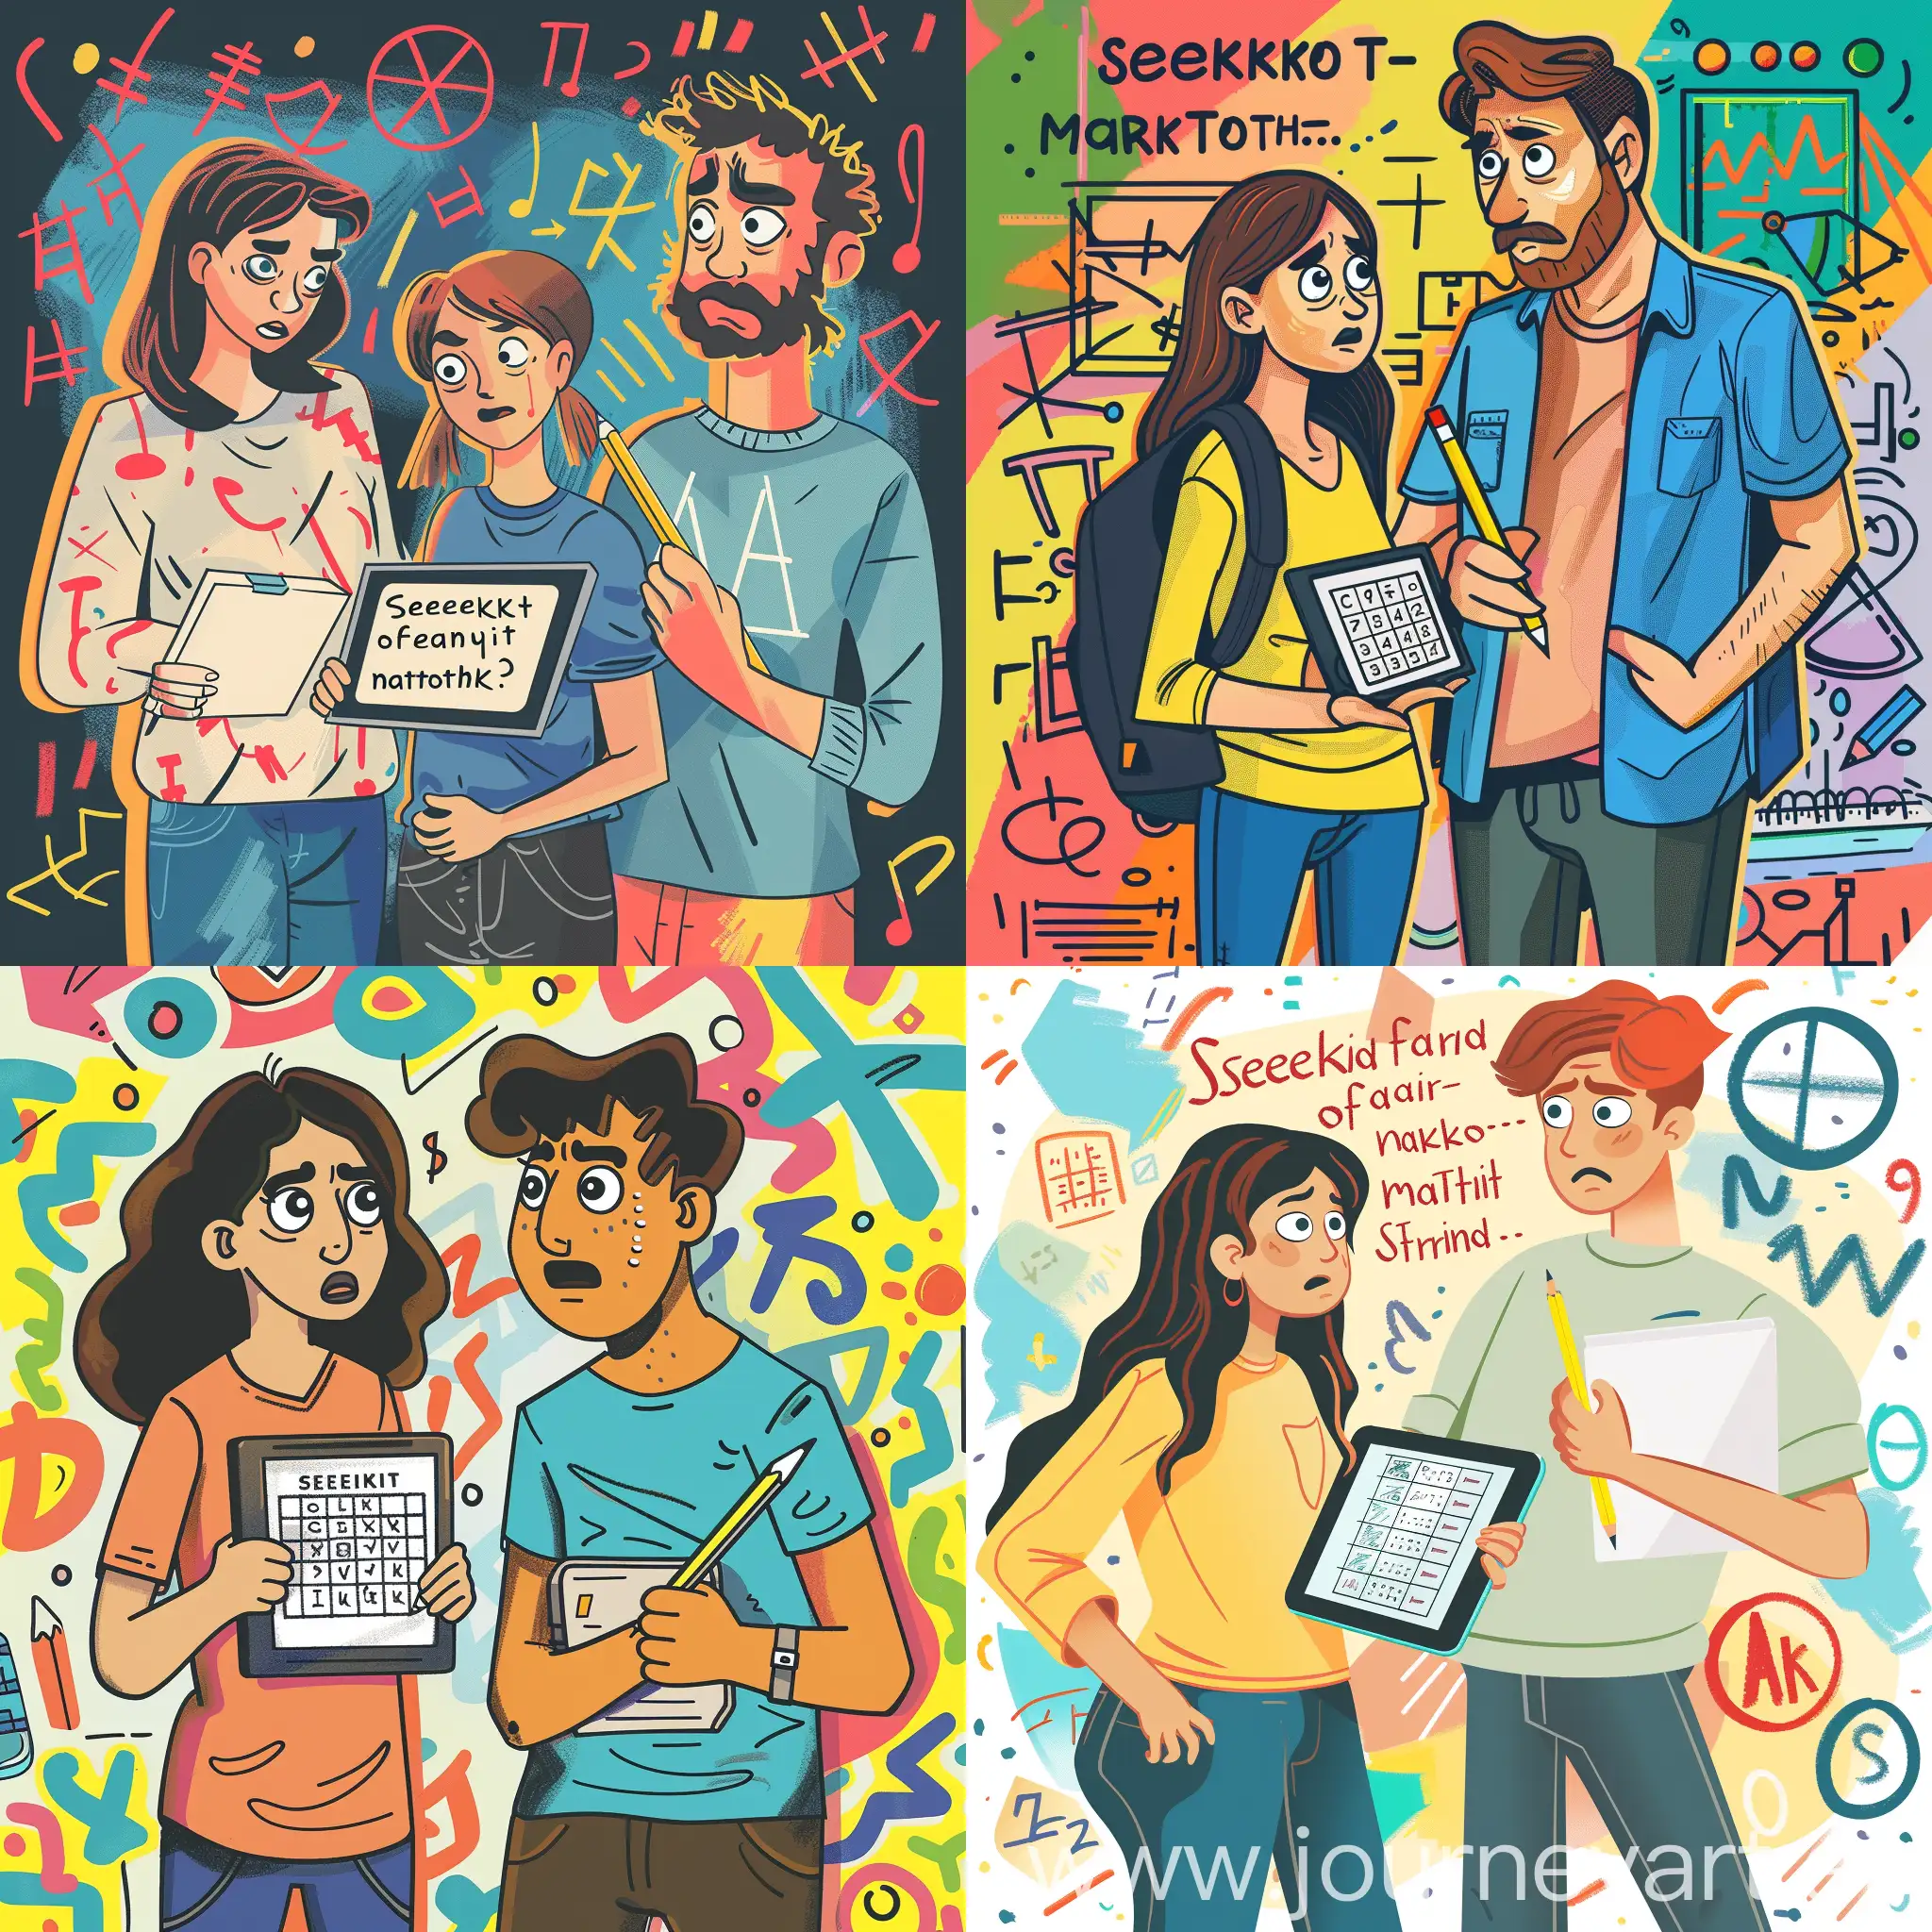  A stylized illustration featuring a parent and teen standing side by side, facing each other with concerned expressions. The parent is holding a tablet displaying a math problem, while the teen is holding a pencil and notebook, looking uncertain. The background is filled with colorful mathematical symbols and doodles. Text overlay reads: "Seeking Parents of Teens Struggling with Math - Market Research Opportunity." The text is in a modern, sans-serif font, easy to read against the colorful background.